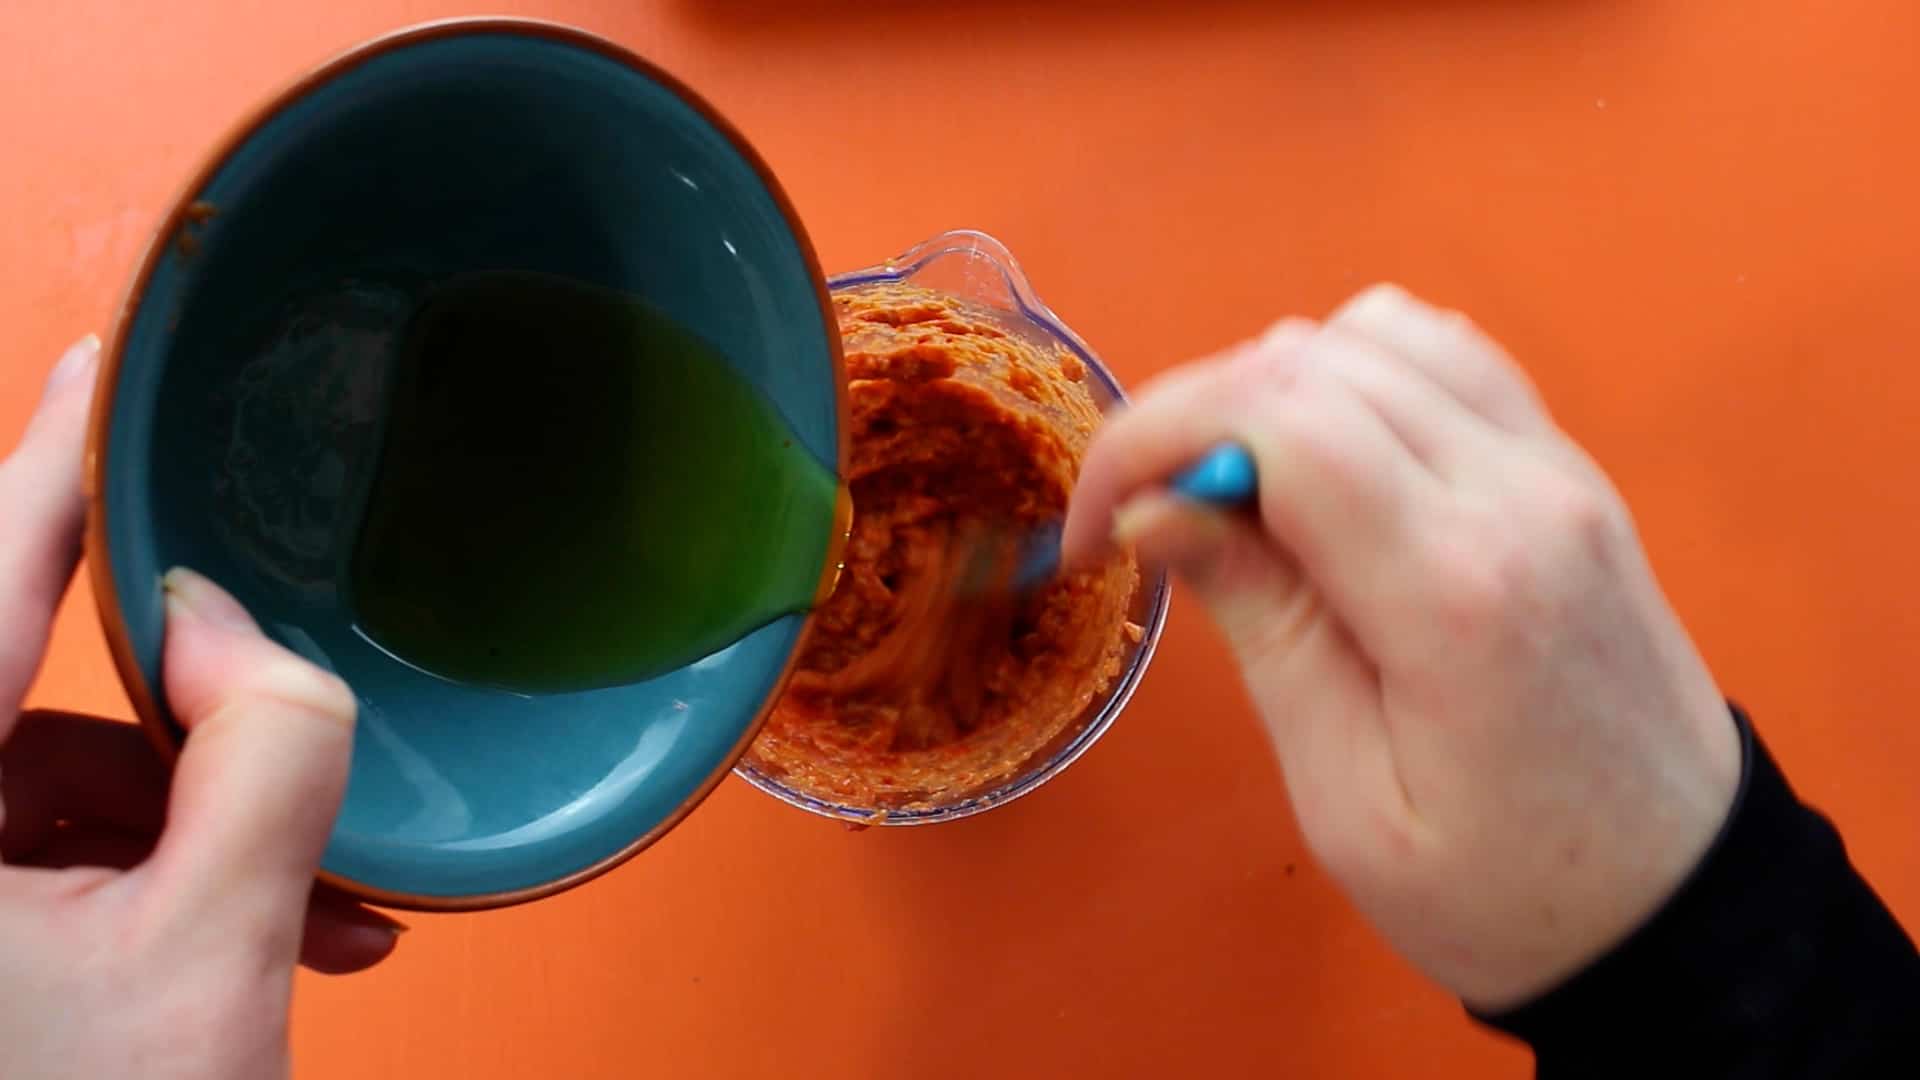 Olive oil being added into the blended sauce Roasted red peppers in a blended cup with walnuts in a bowl and tomato paste in tube and hand blender on an orange background.